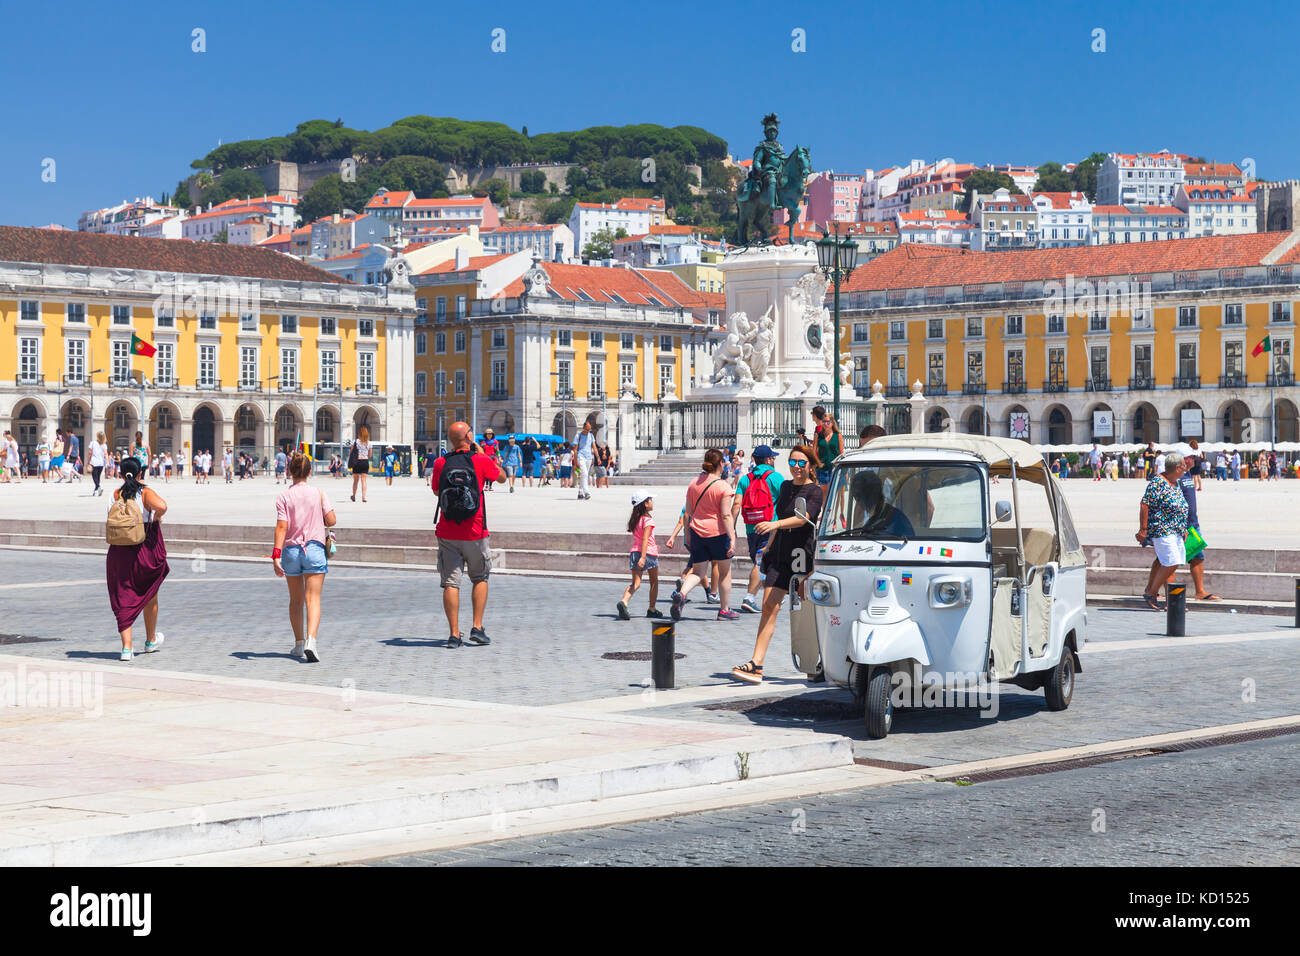 Lisbon, Portugal - August 12, 2017: White Tuk Tuk taxi cab stands on Commerce Square in Lisbon. Ordinary people and tourists walk nearby Stock Photo